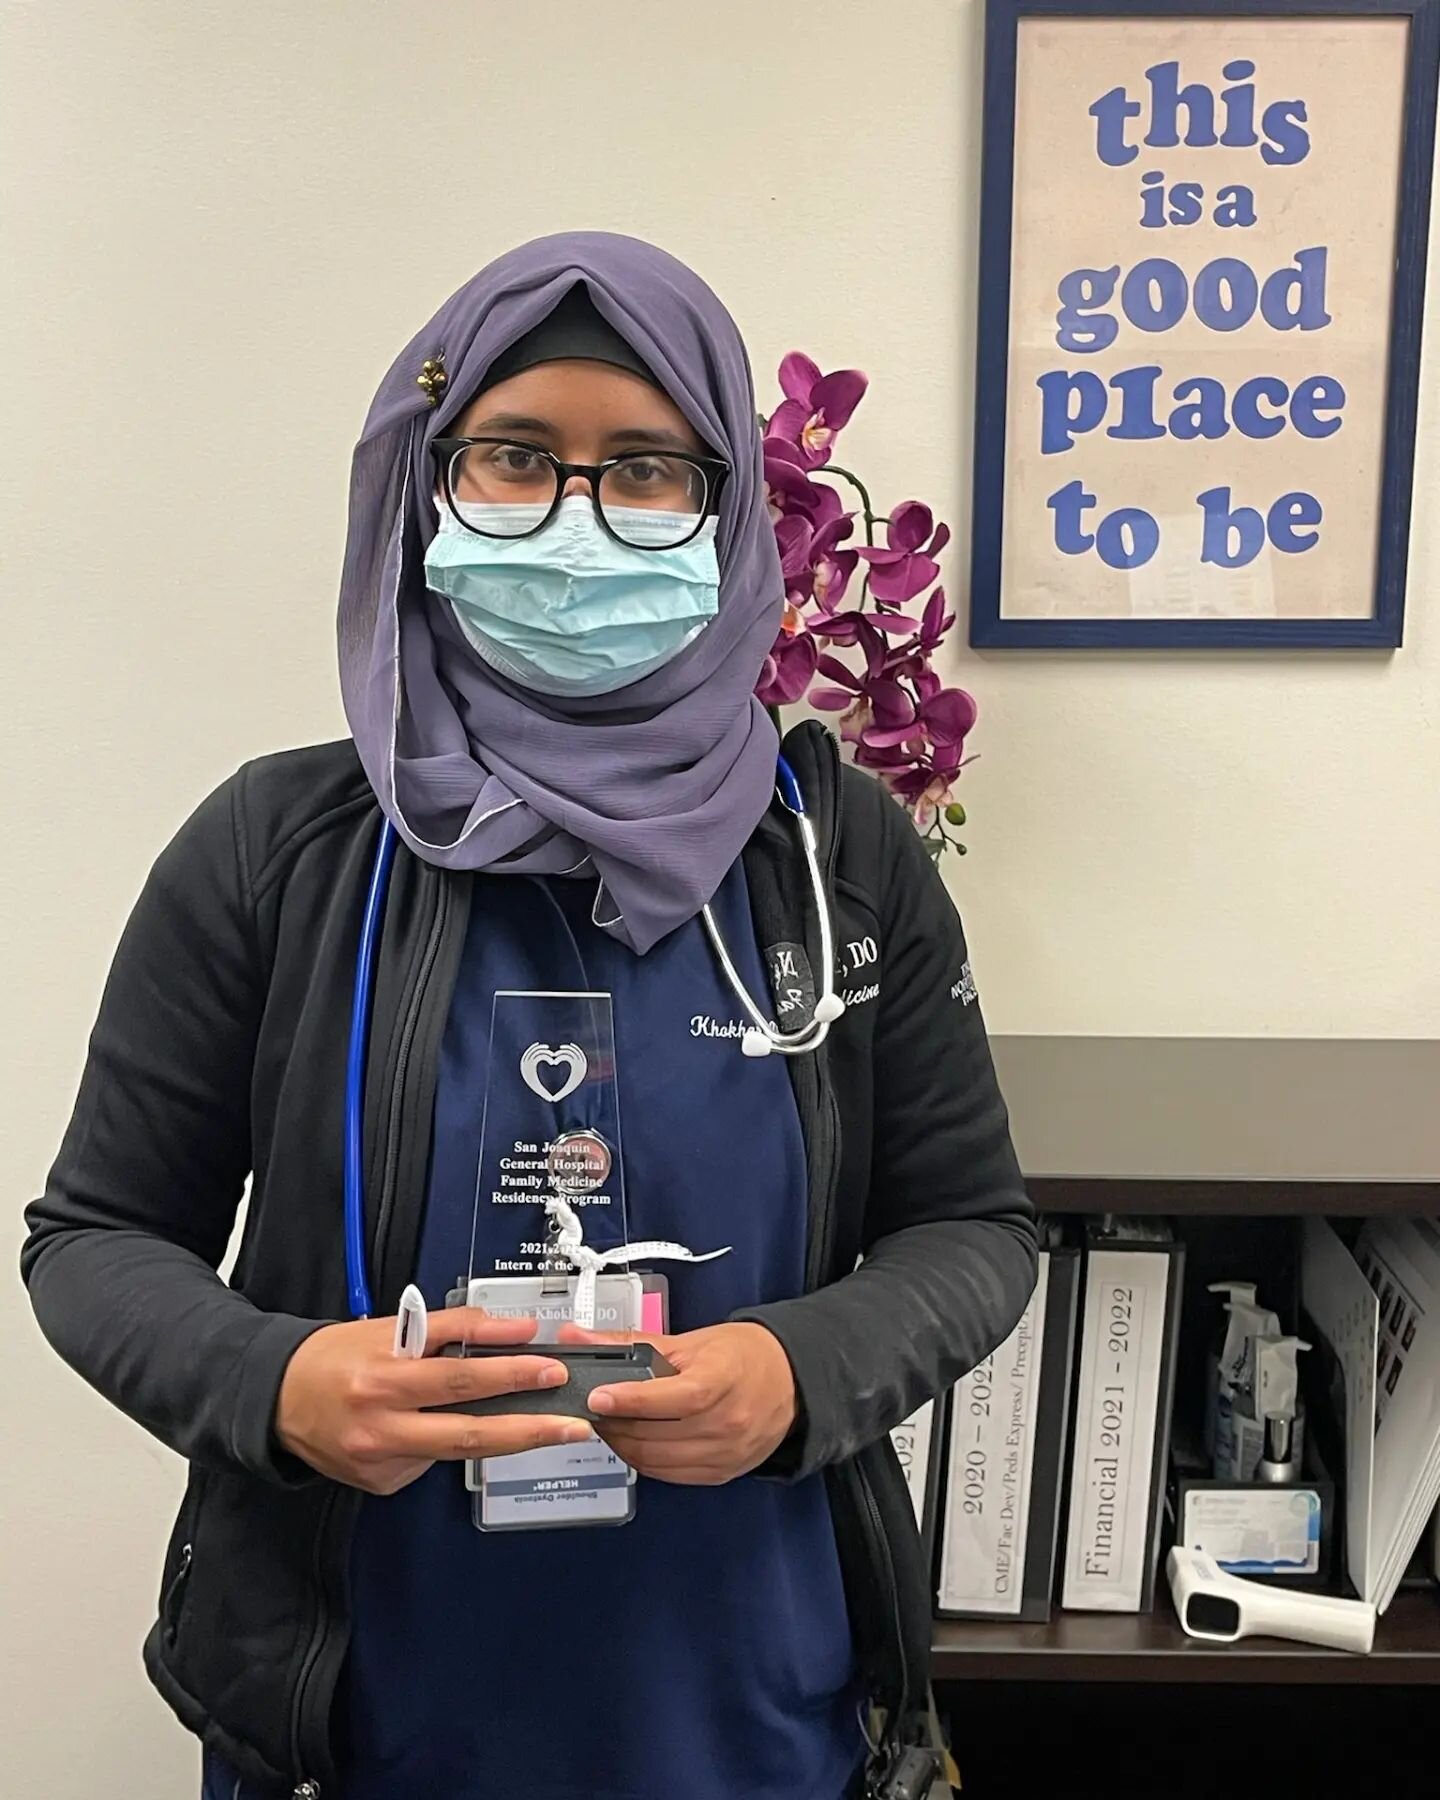 We know that intern year is probably the hardest in residency, that's why we decided to start a new tradition that recognizes the hard work and steep learning curve our interns go through.
Our 2021-2022 Intern of the year Award goes to... 
Dr. Natash